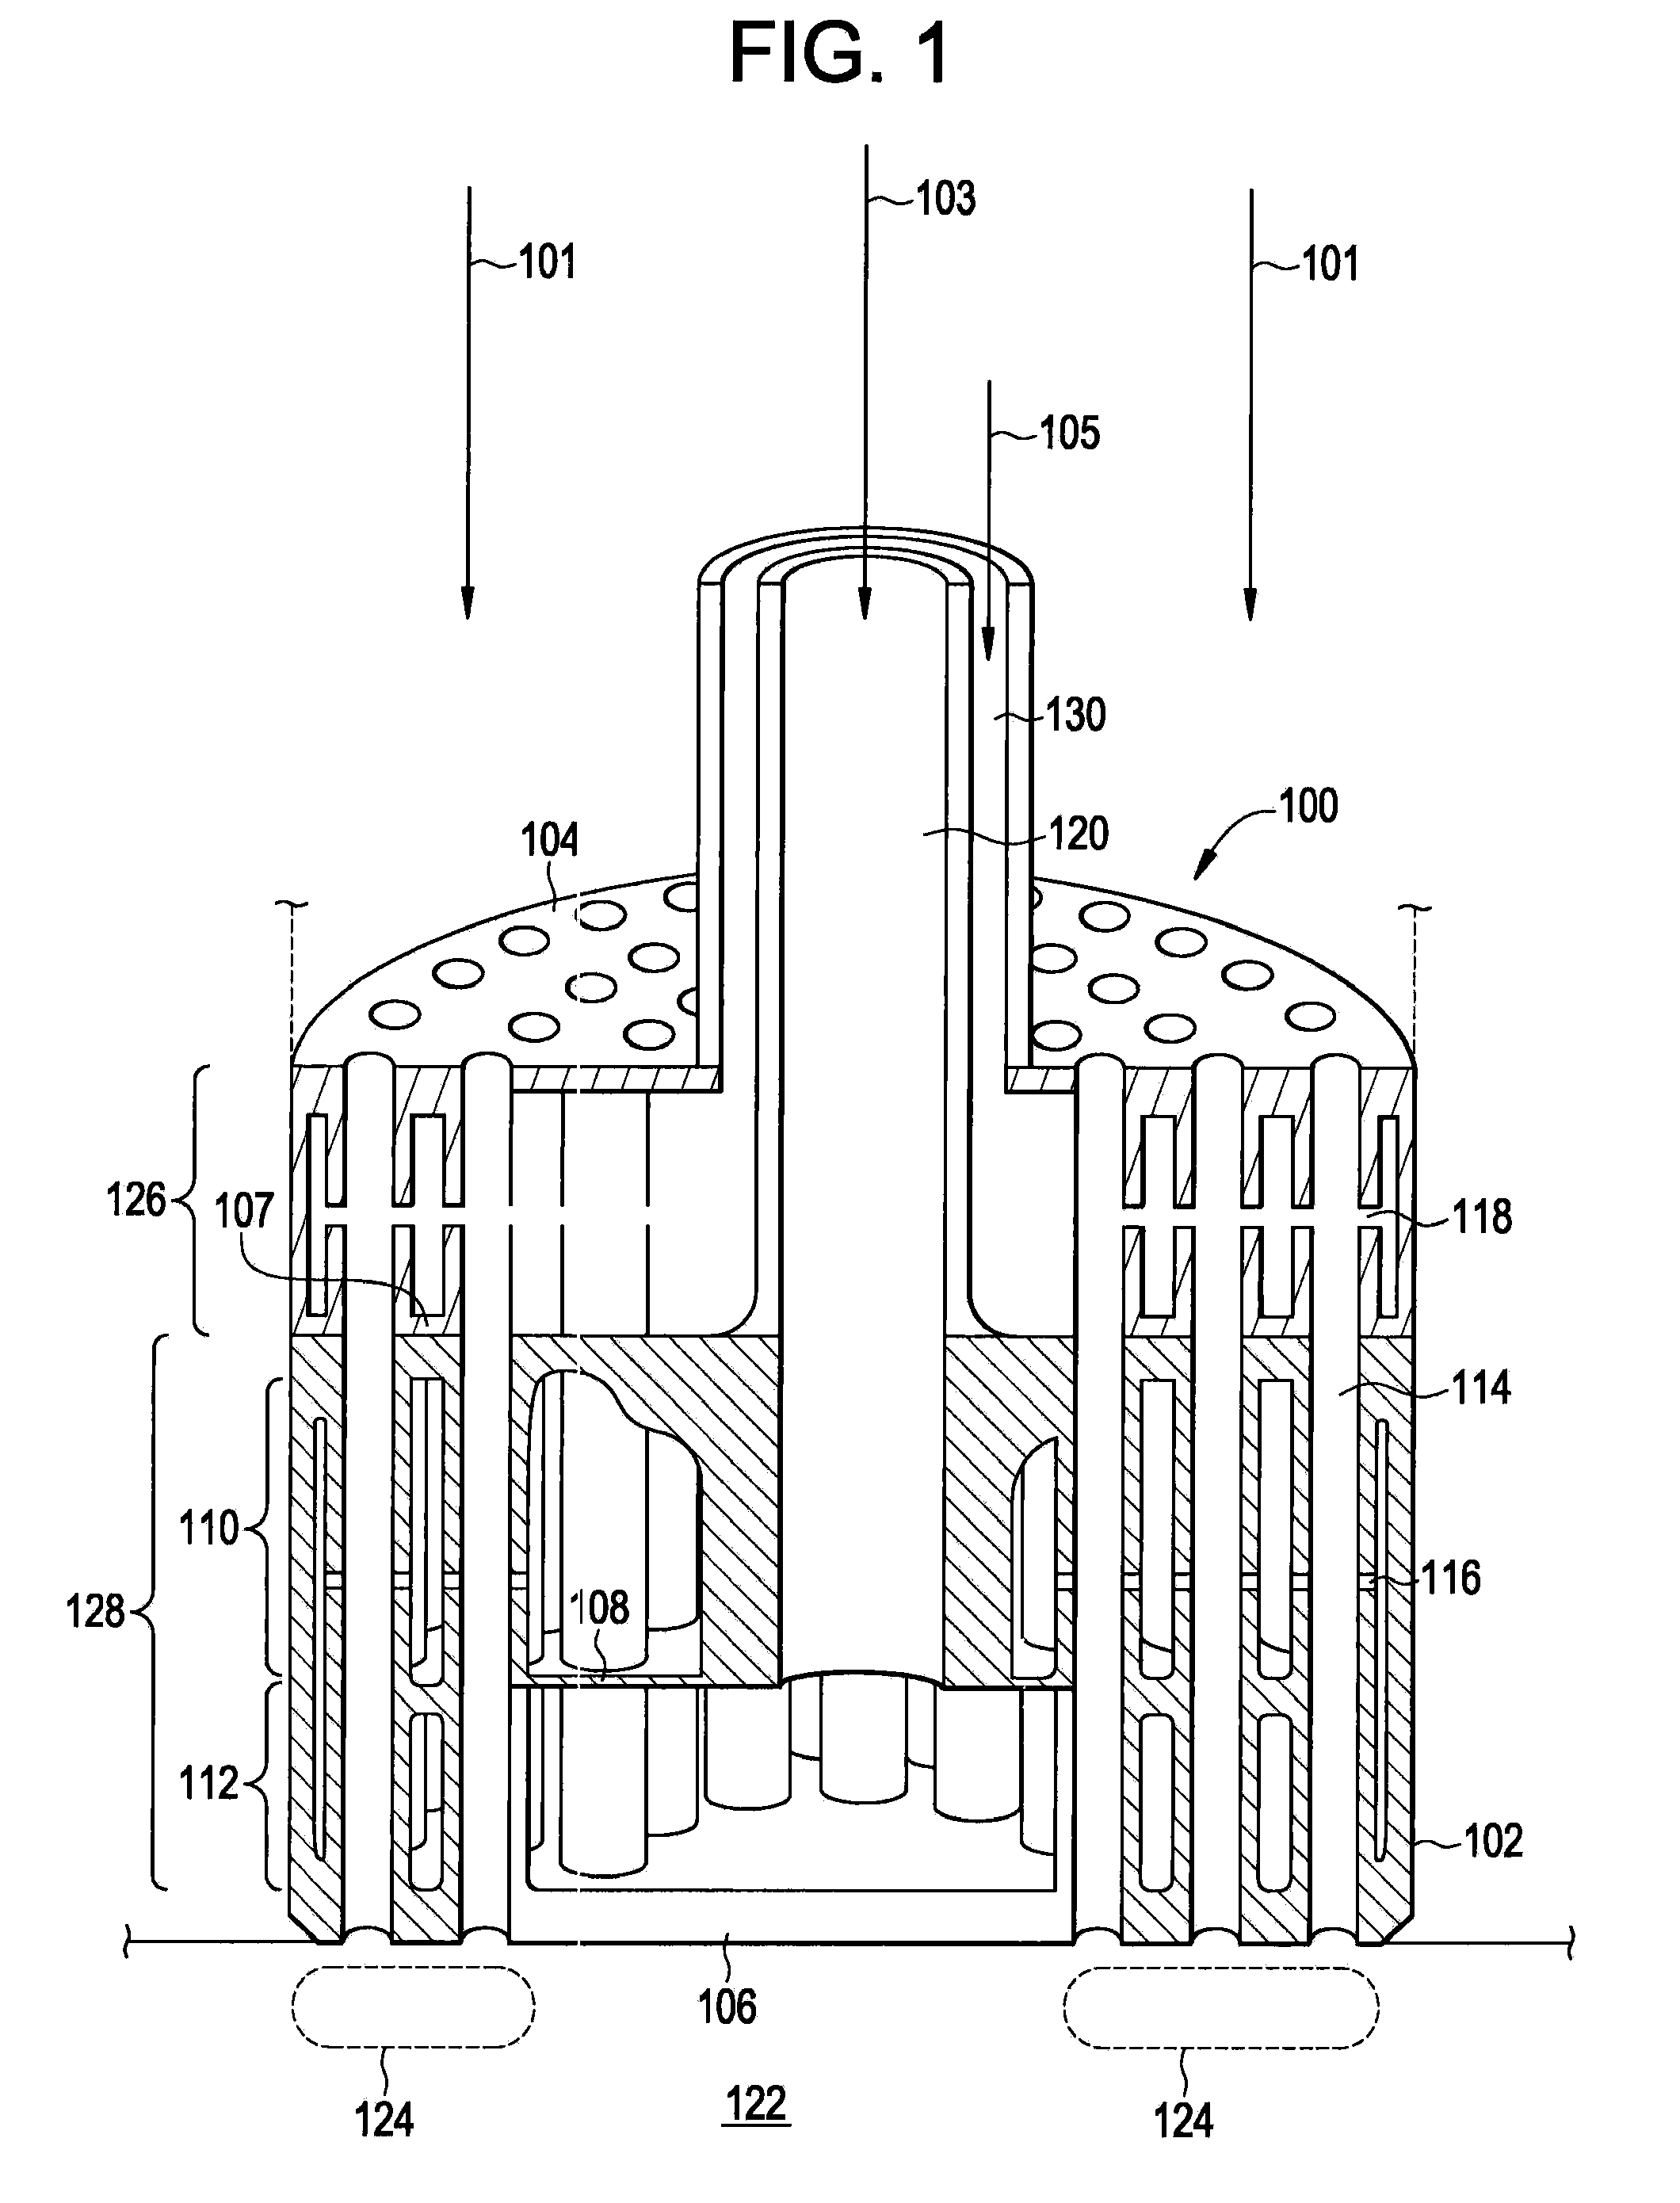 Staged Multi-Tube Premixing Injector